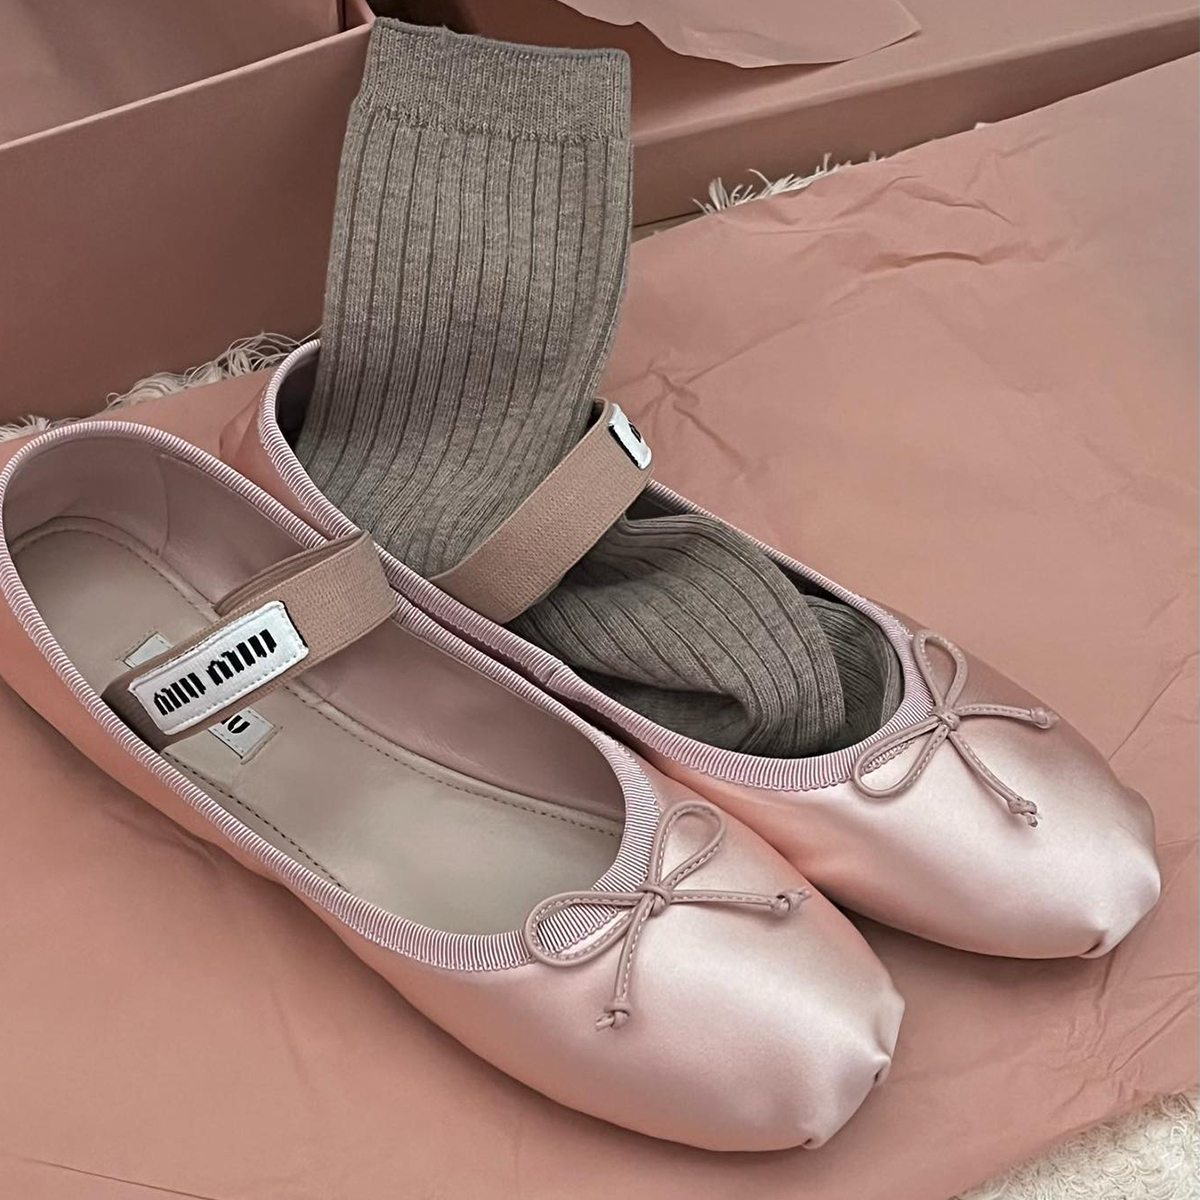 These Miu Miu Satin Ballet Flats Are About to Go Viral